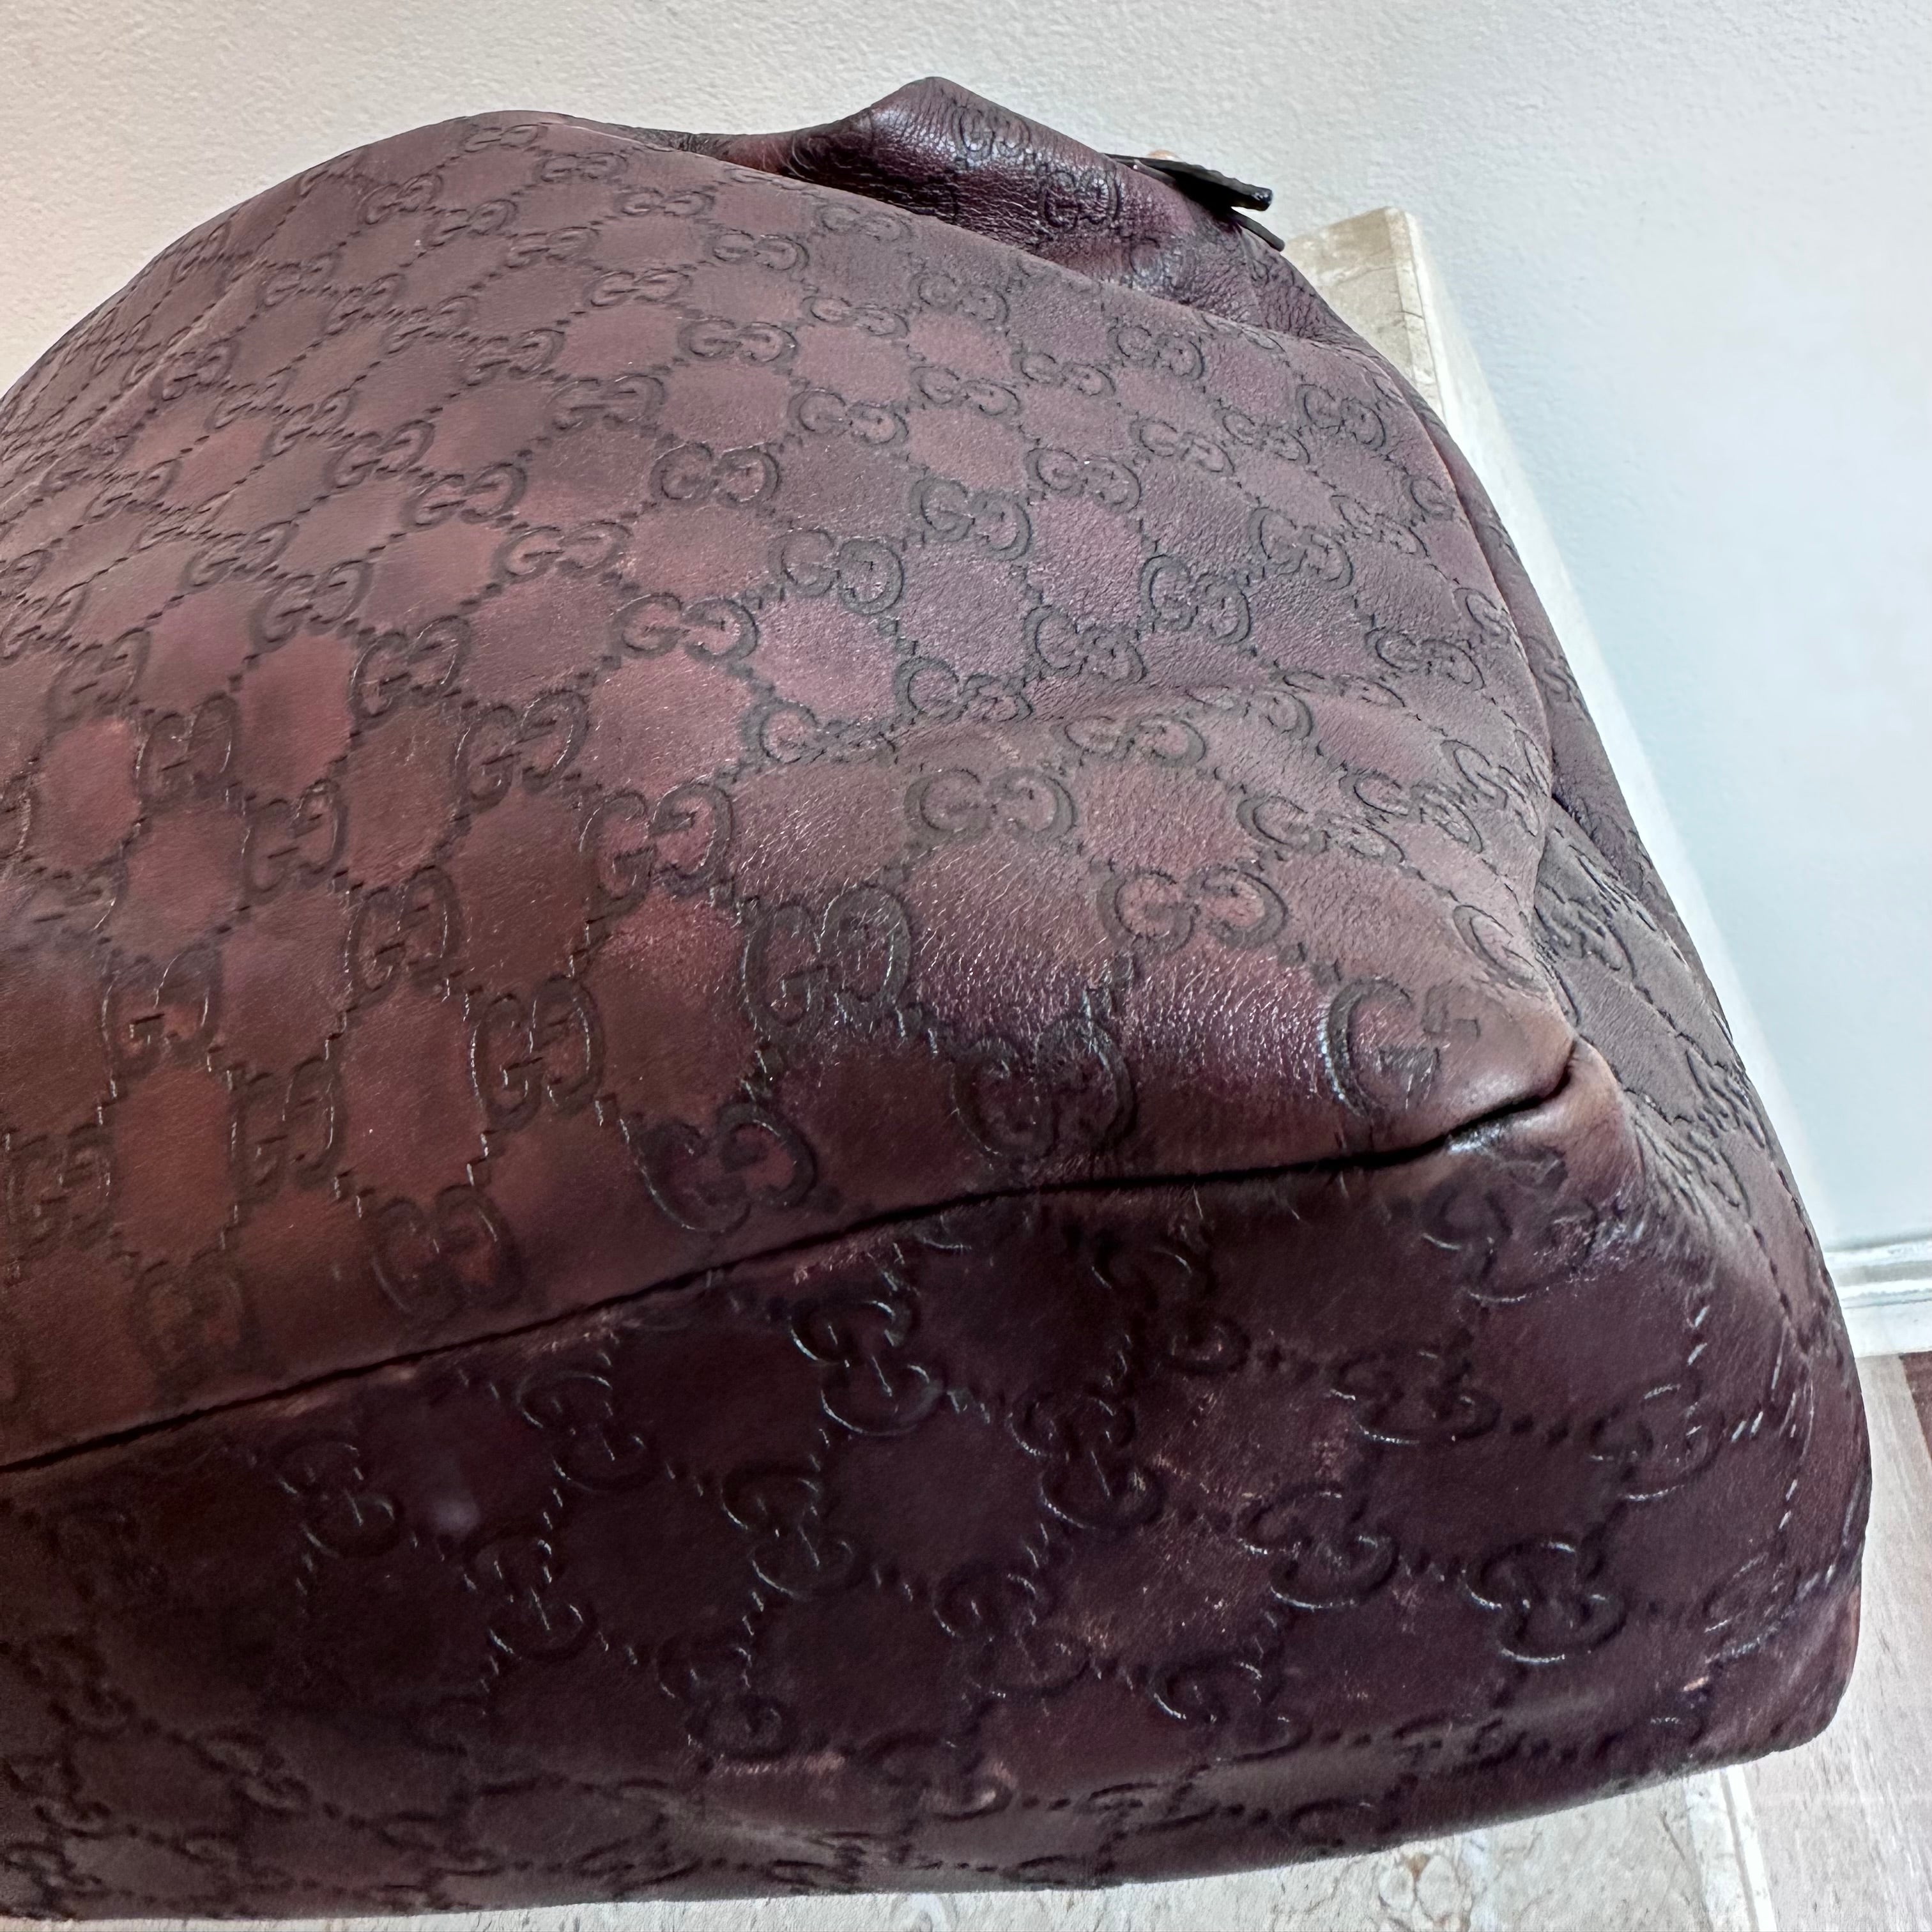 Pre-Owned GUCCI Large Brown Guccissima Horsebit Hobo